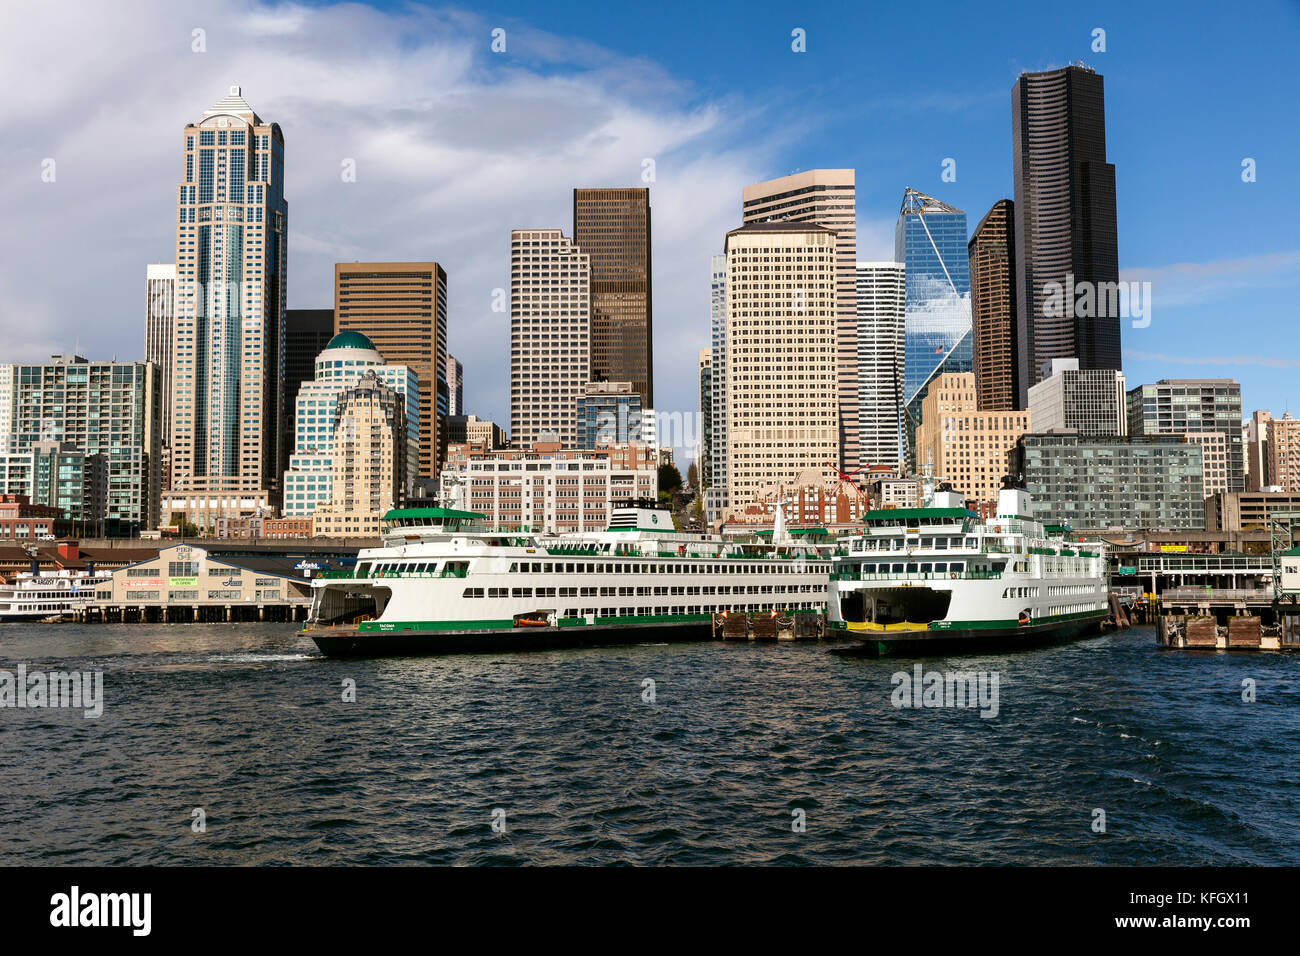 WA14051-00...WASHINGTON - Down town Seattle viewed from the deck of the Seattle to Bremerton Ferry. Stock Photo